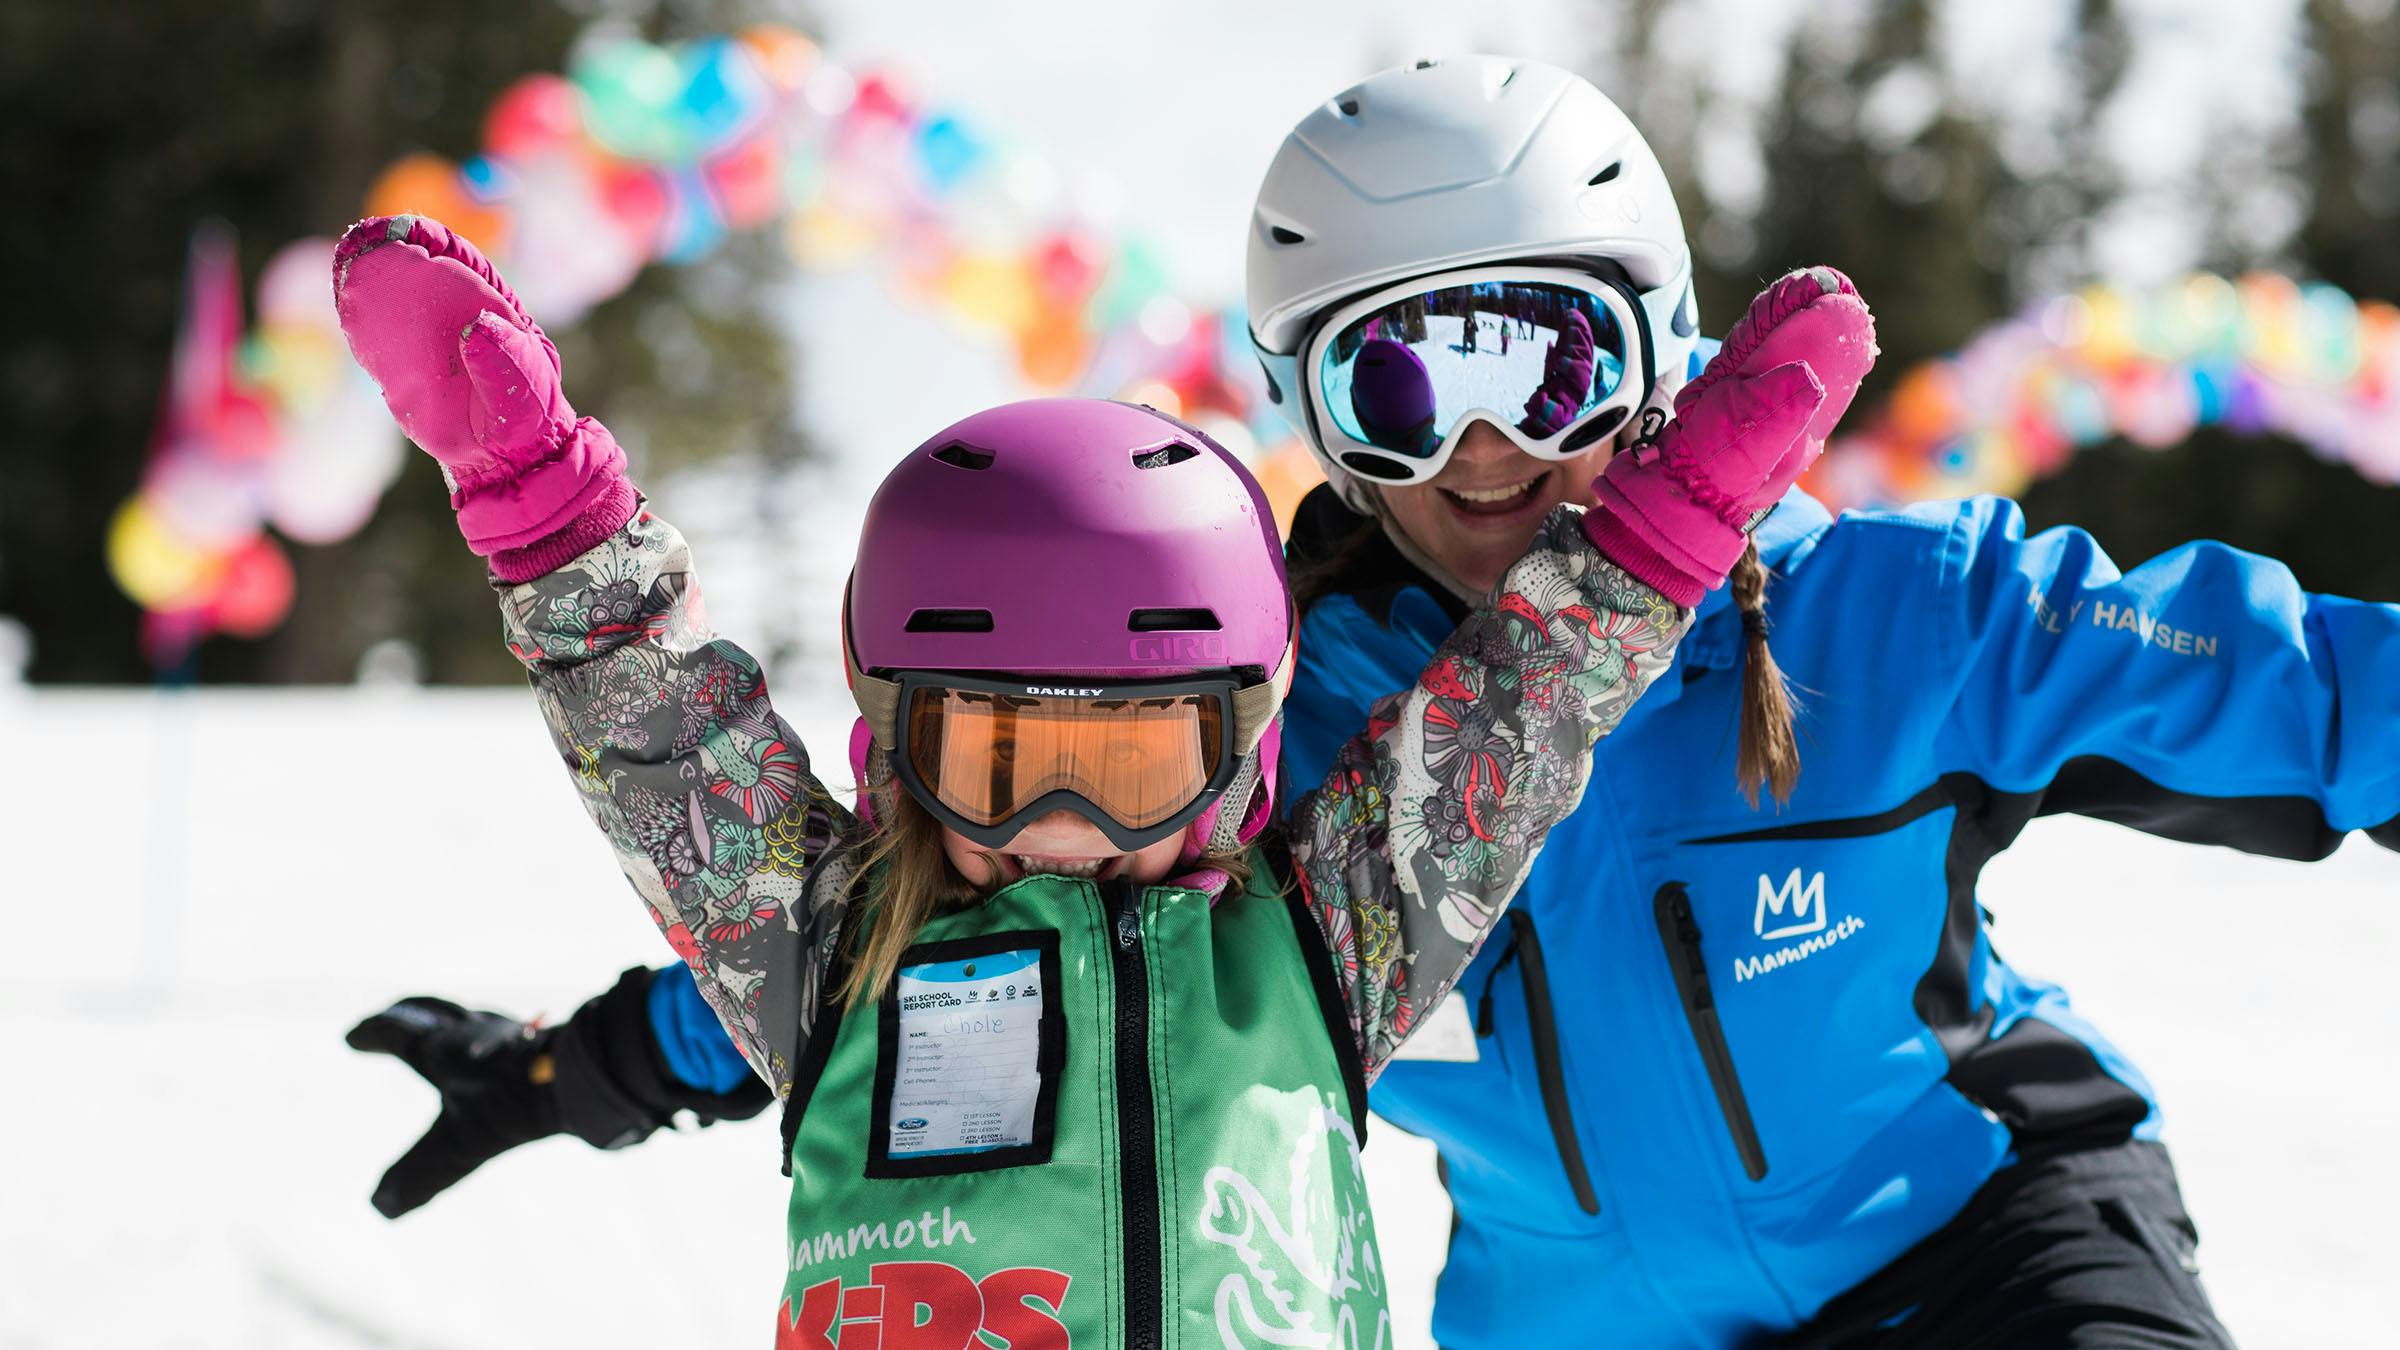 Girl with hands up skiing in front of instructor